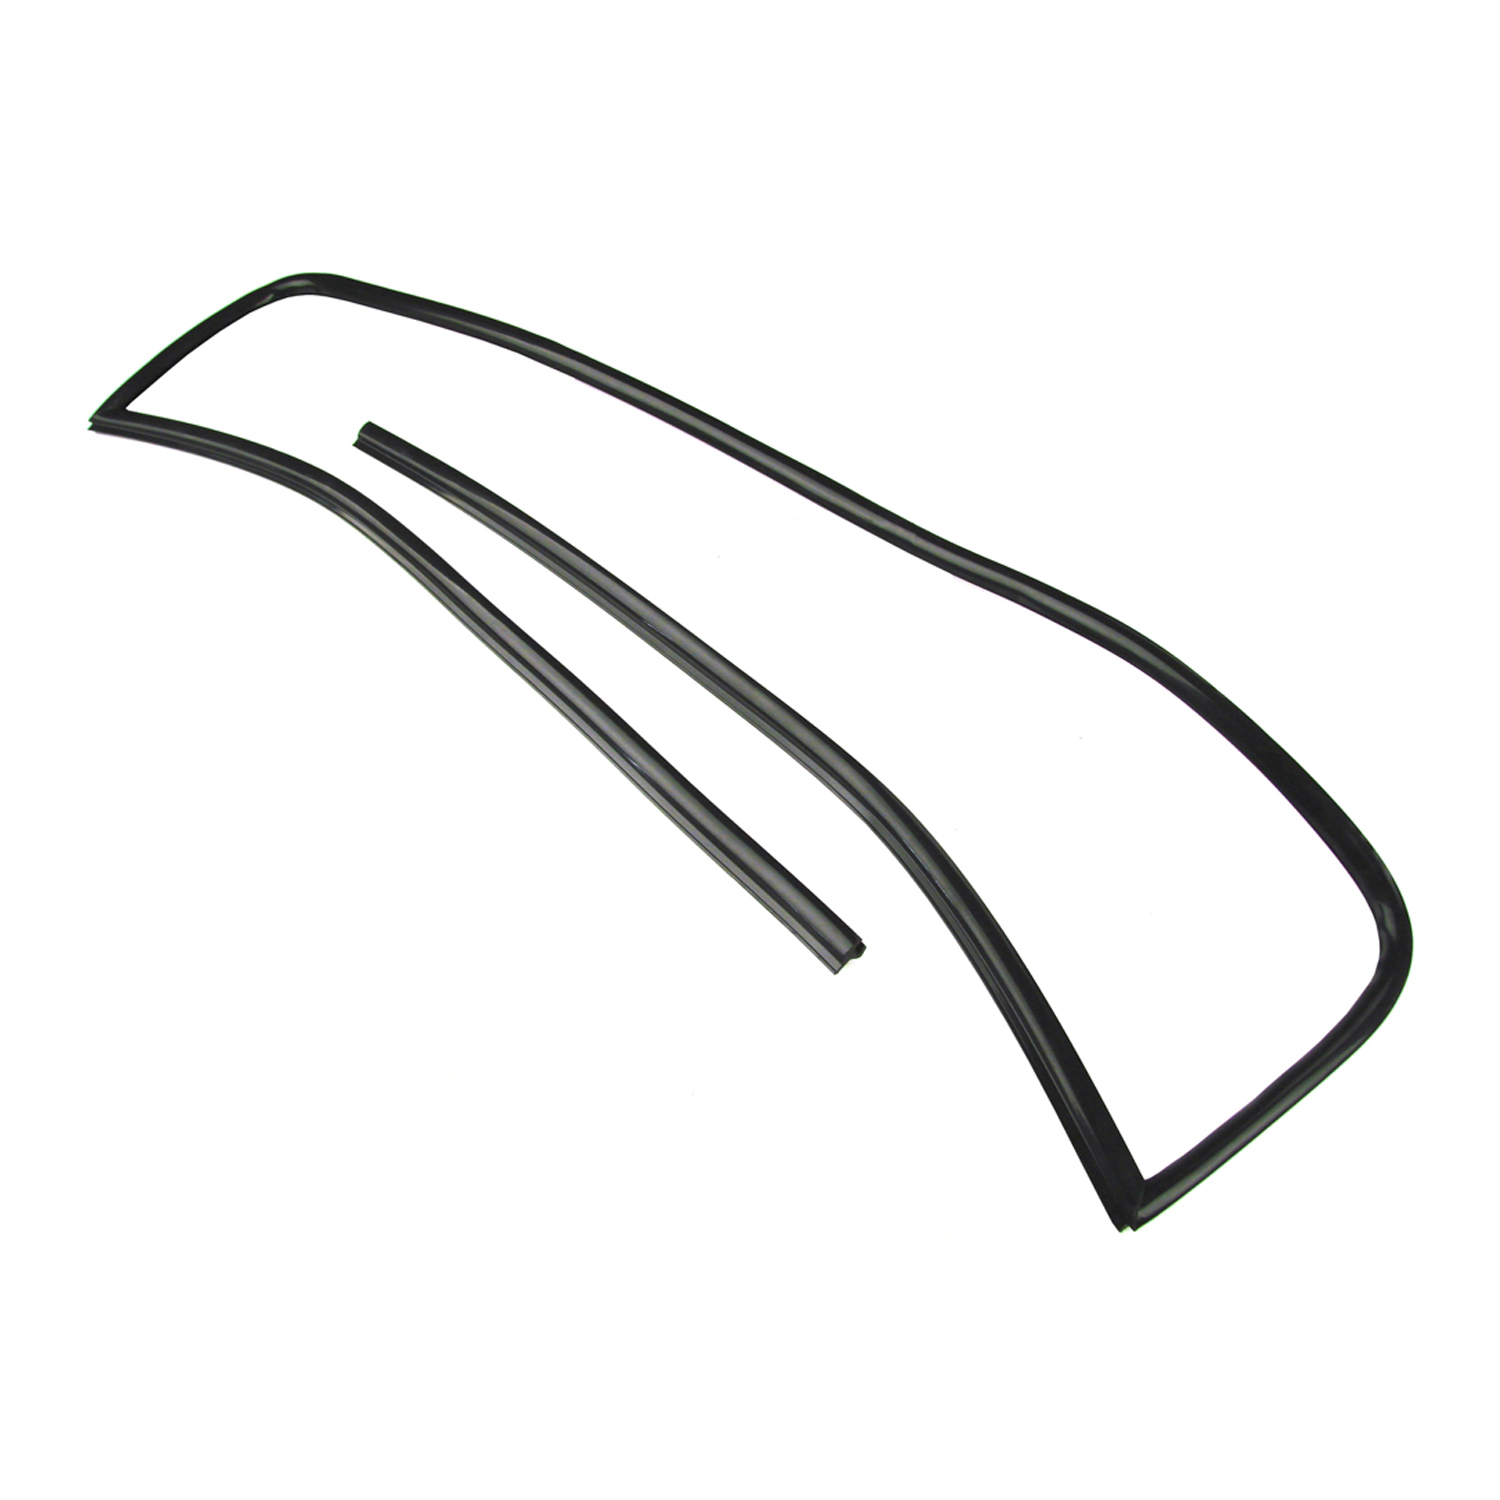 1996 Chevrolet Camaro Windshield Seal, 93-02 GM F Body Coupe Without T-Top Option, Each-VWS 1967-M